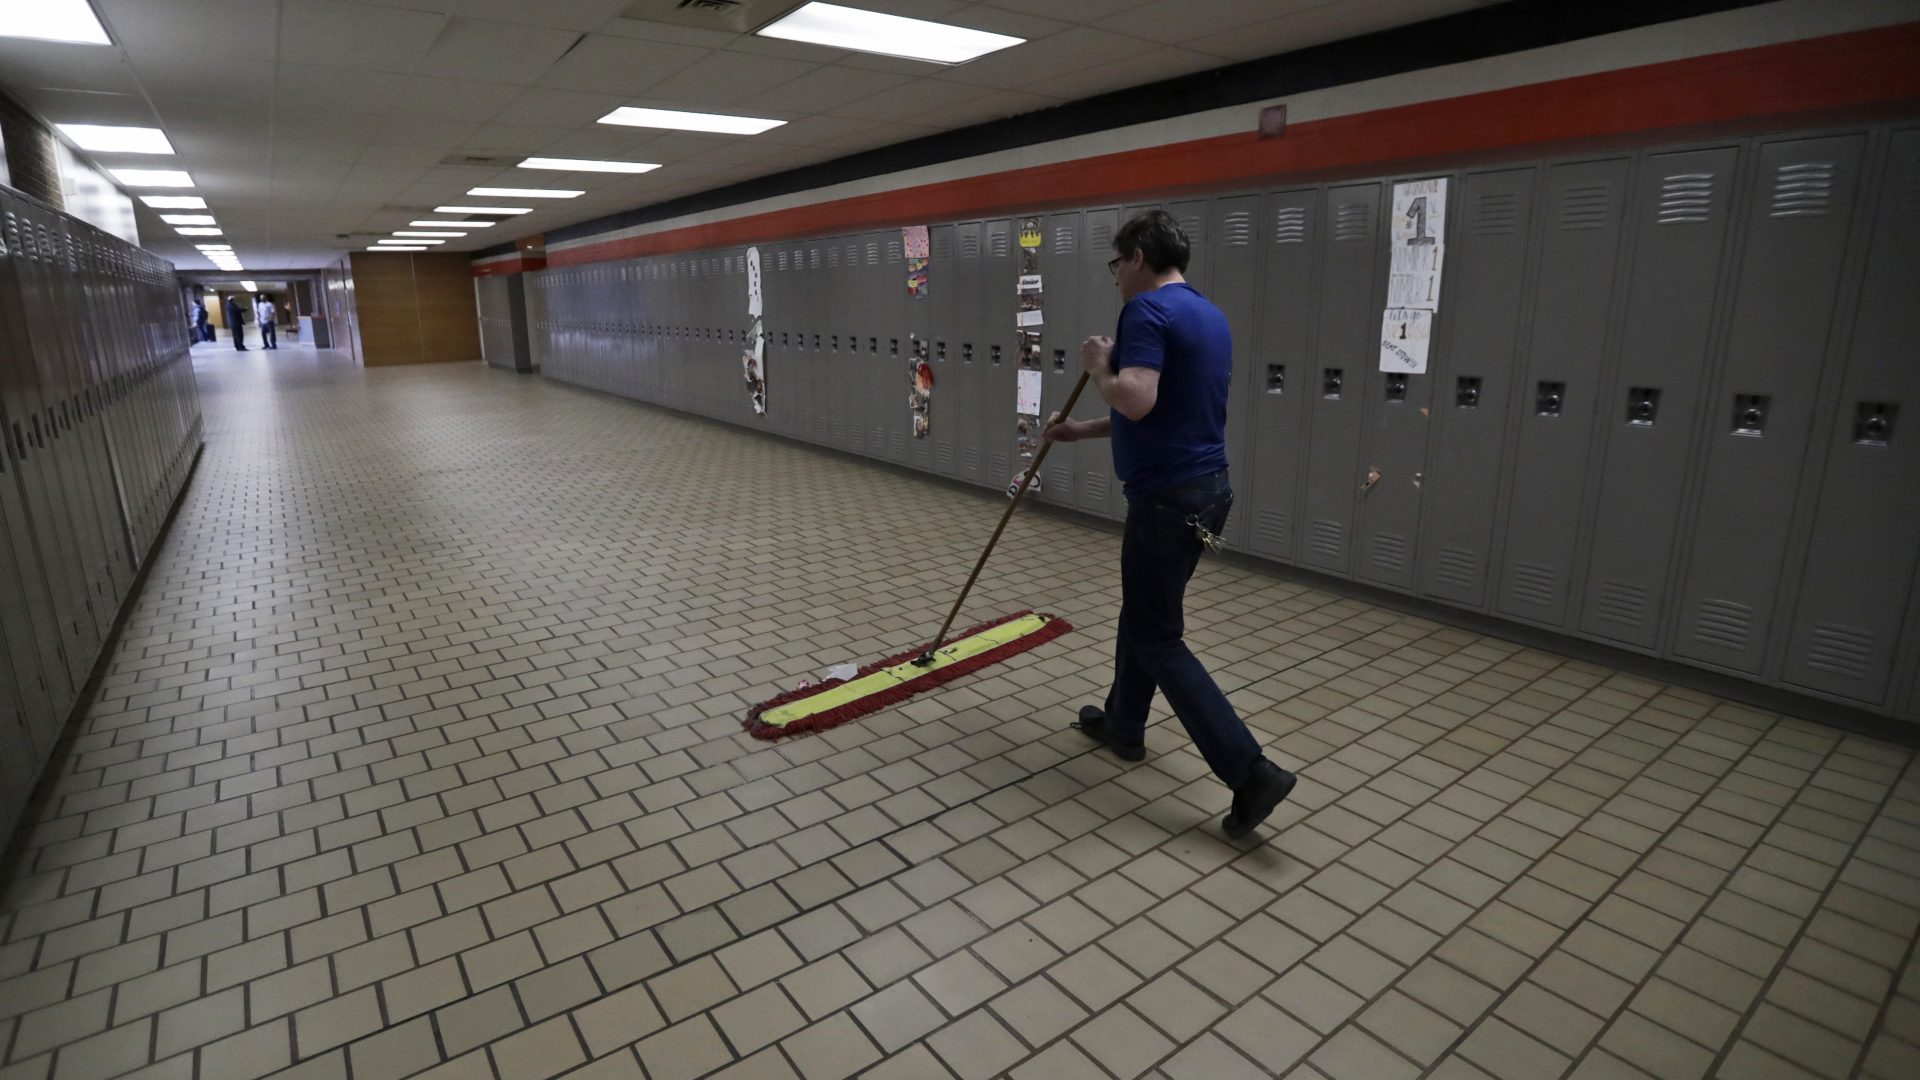 Evening building supervisor Randy Allen sweeps the hallways at Orange High School, March 12, 2020, in Pepper Pike, Ohio. Gov. Mike DeWine ordered all schools closed for three weeks. Pennsylvania Gov. Tom Wolf on March 13 ordered all K-12 schools in the state be closed for 10 business days, starting Monday.